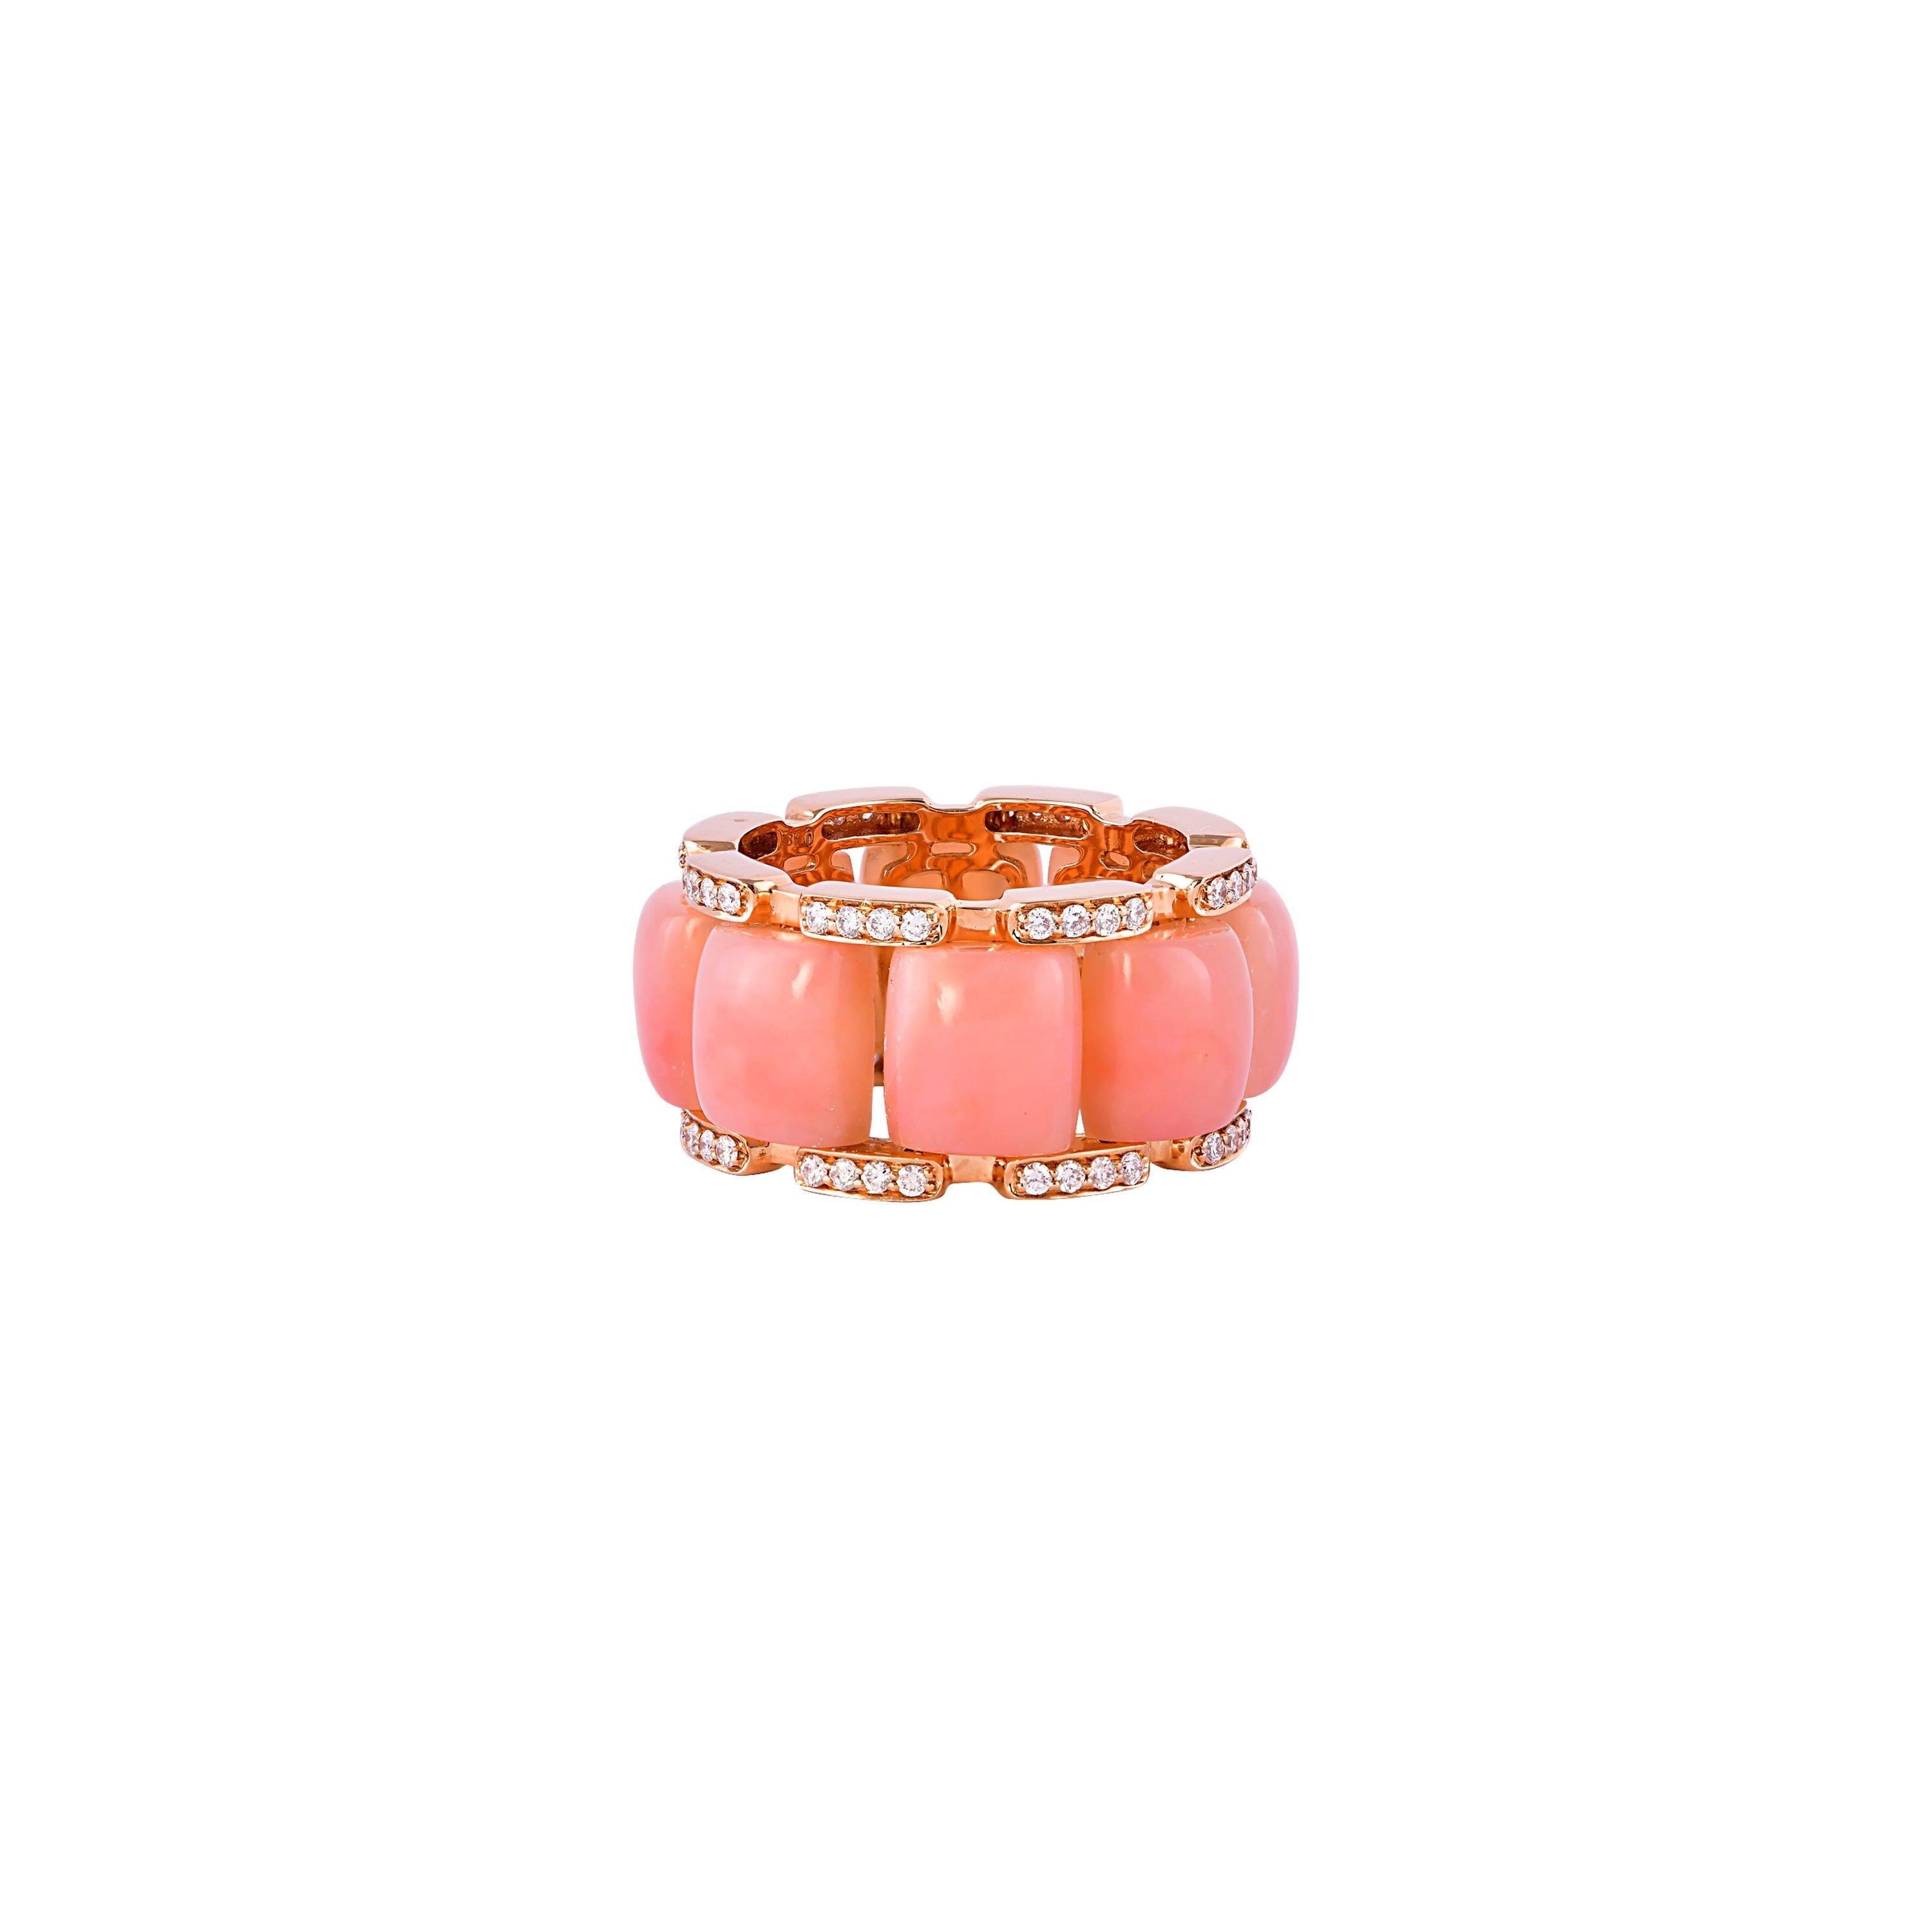 For Sale:  12.3 Carat Pink Opal and White Diamond Ring in 18 Karat Rose Gold 5